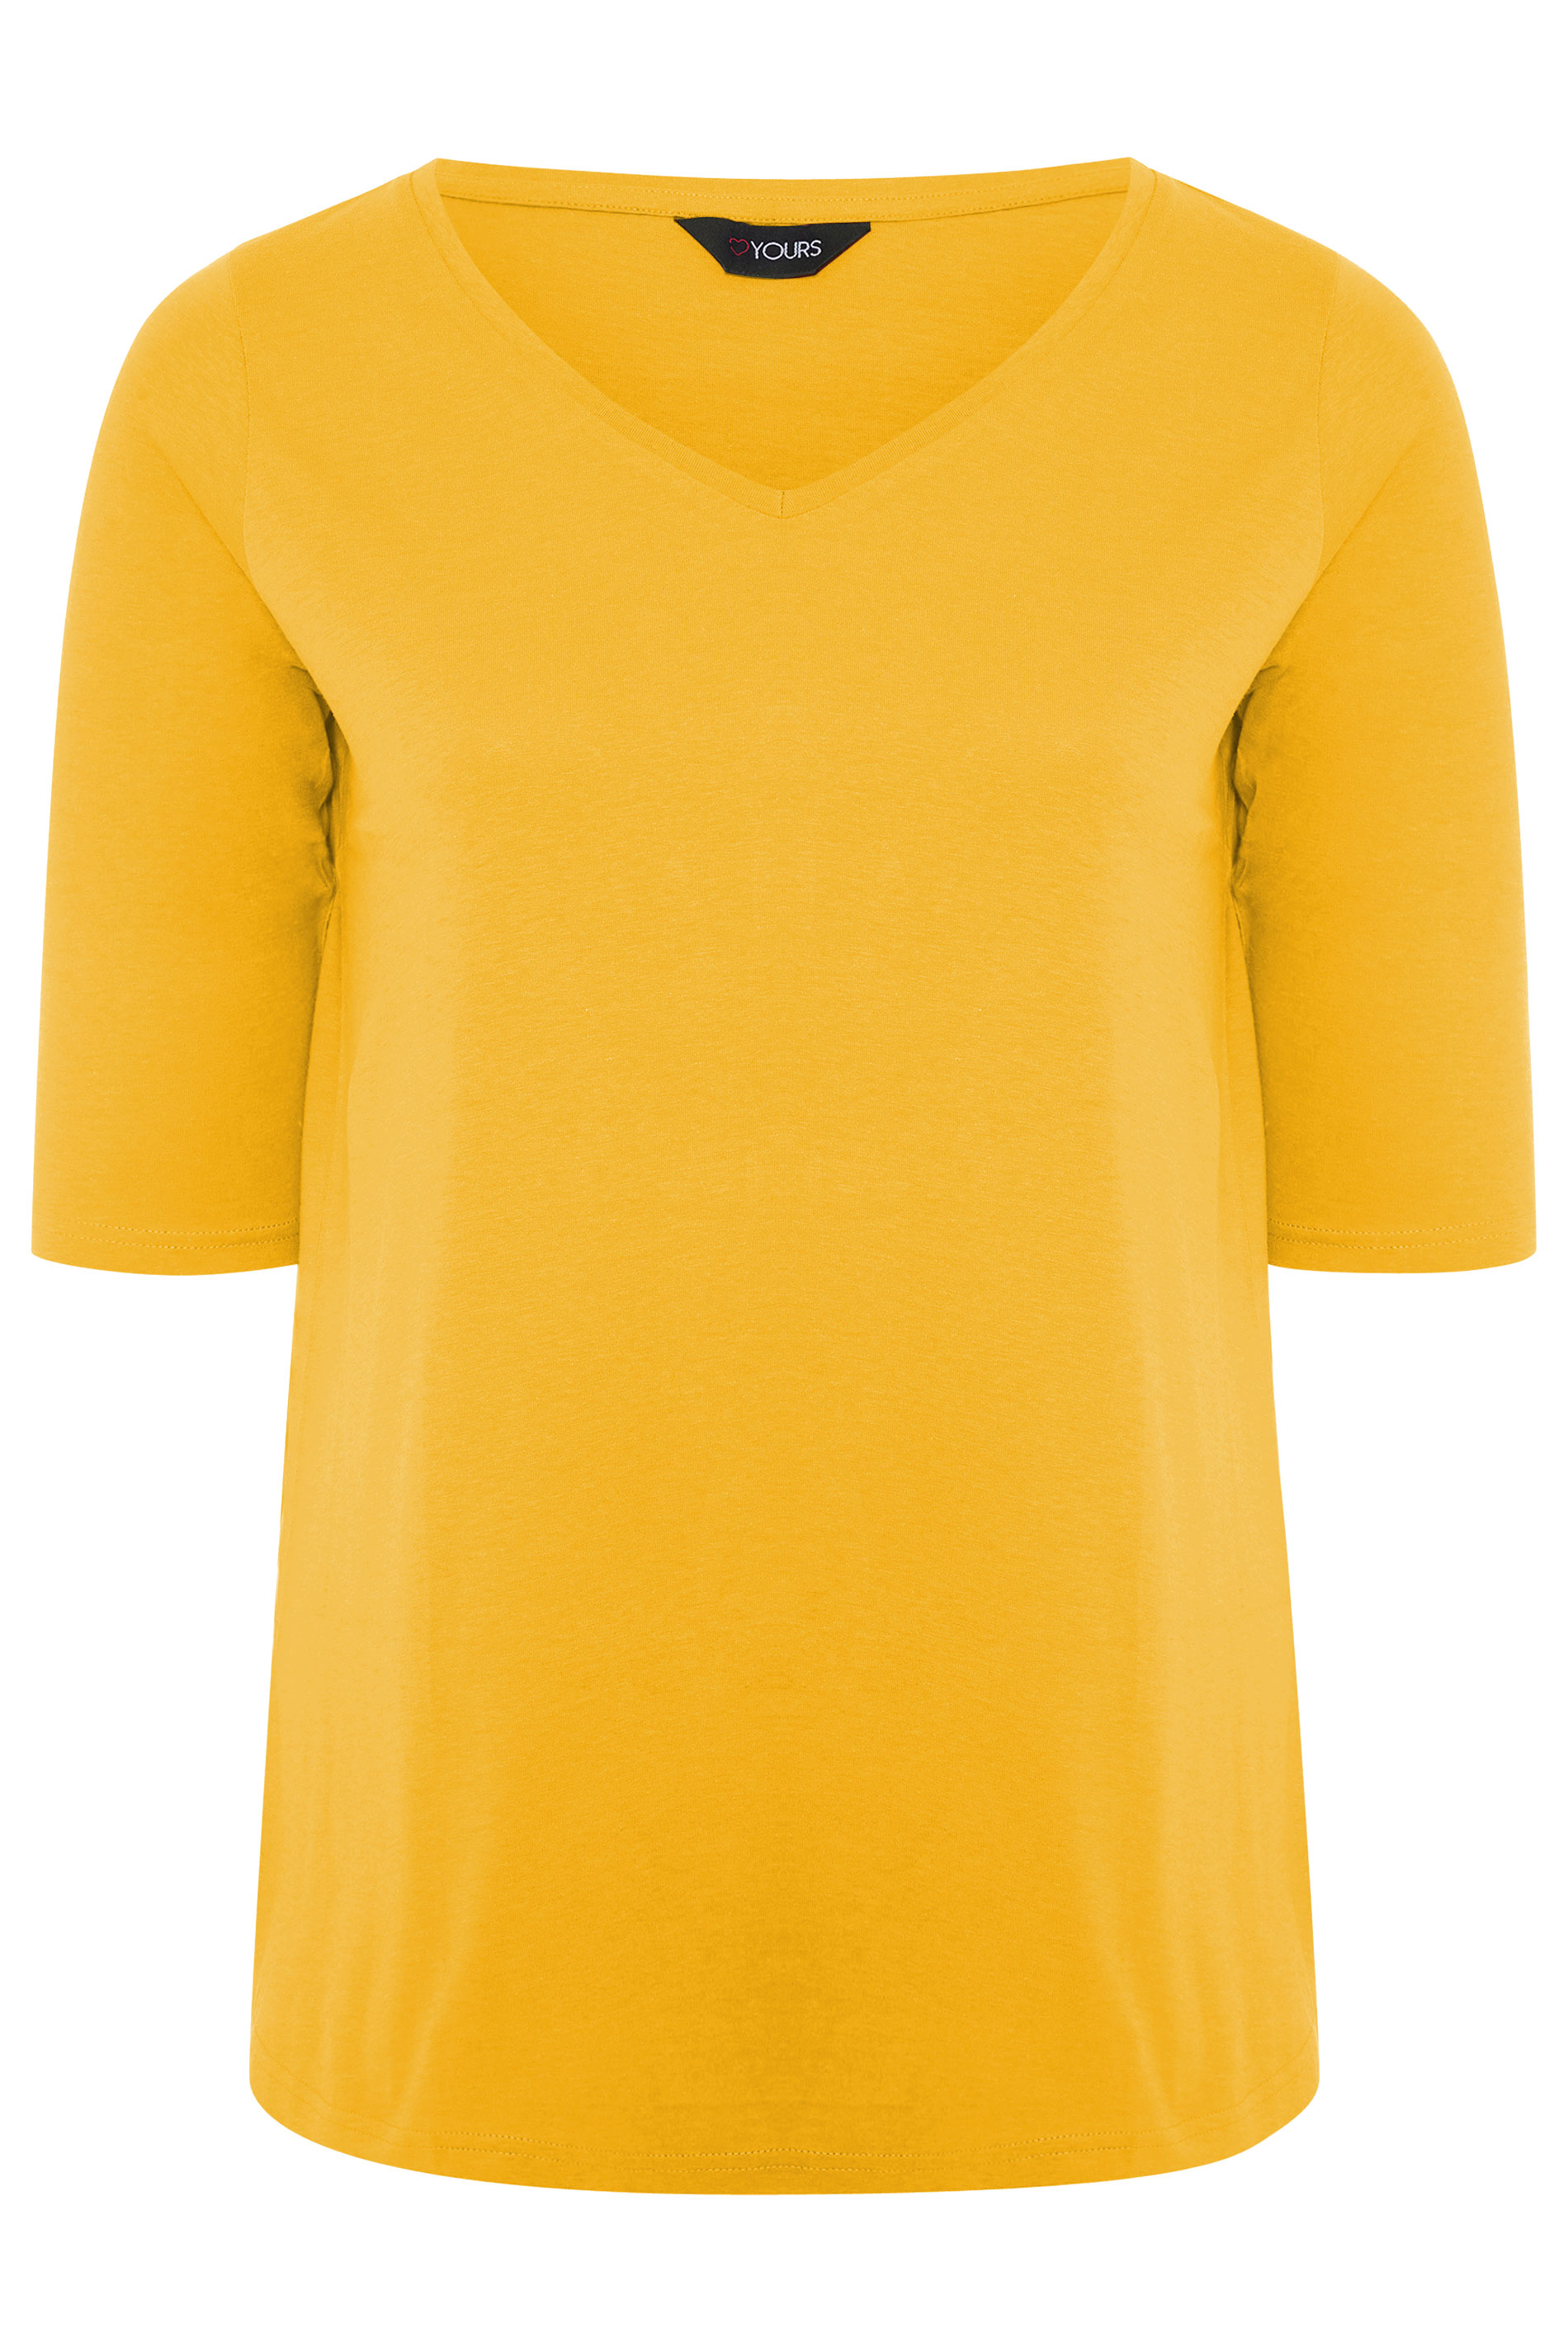 Mustard Yellow V-Neck Cotton Top | Yours Clothing